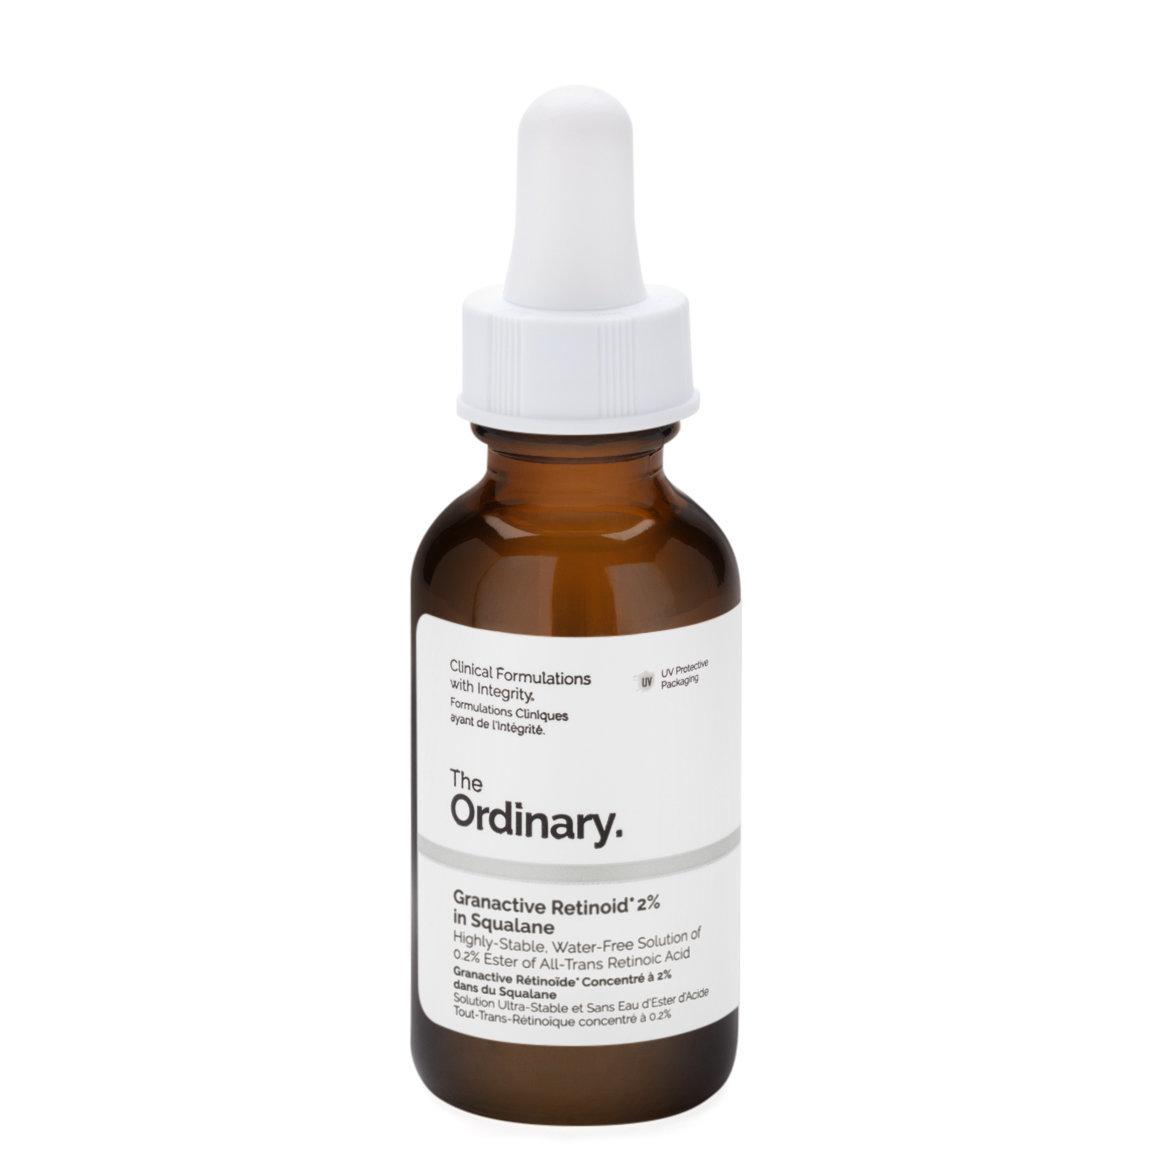 The Ordinary. Granactive Retinoid 2% in Squalane alternative view 1 - product swatch.